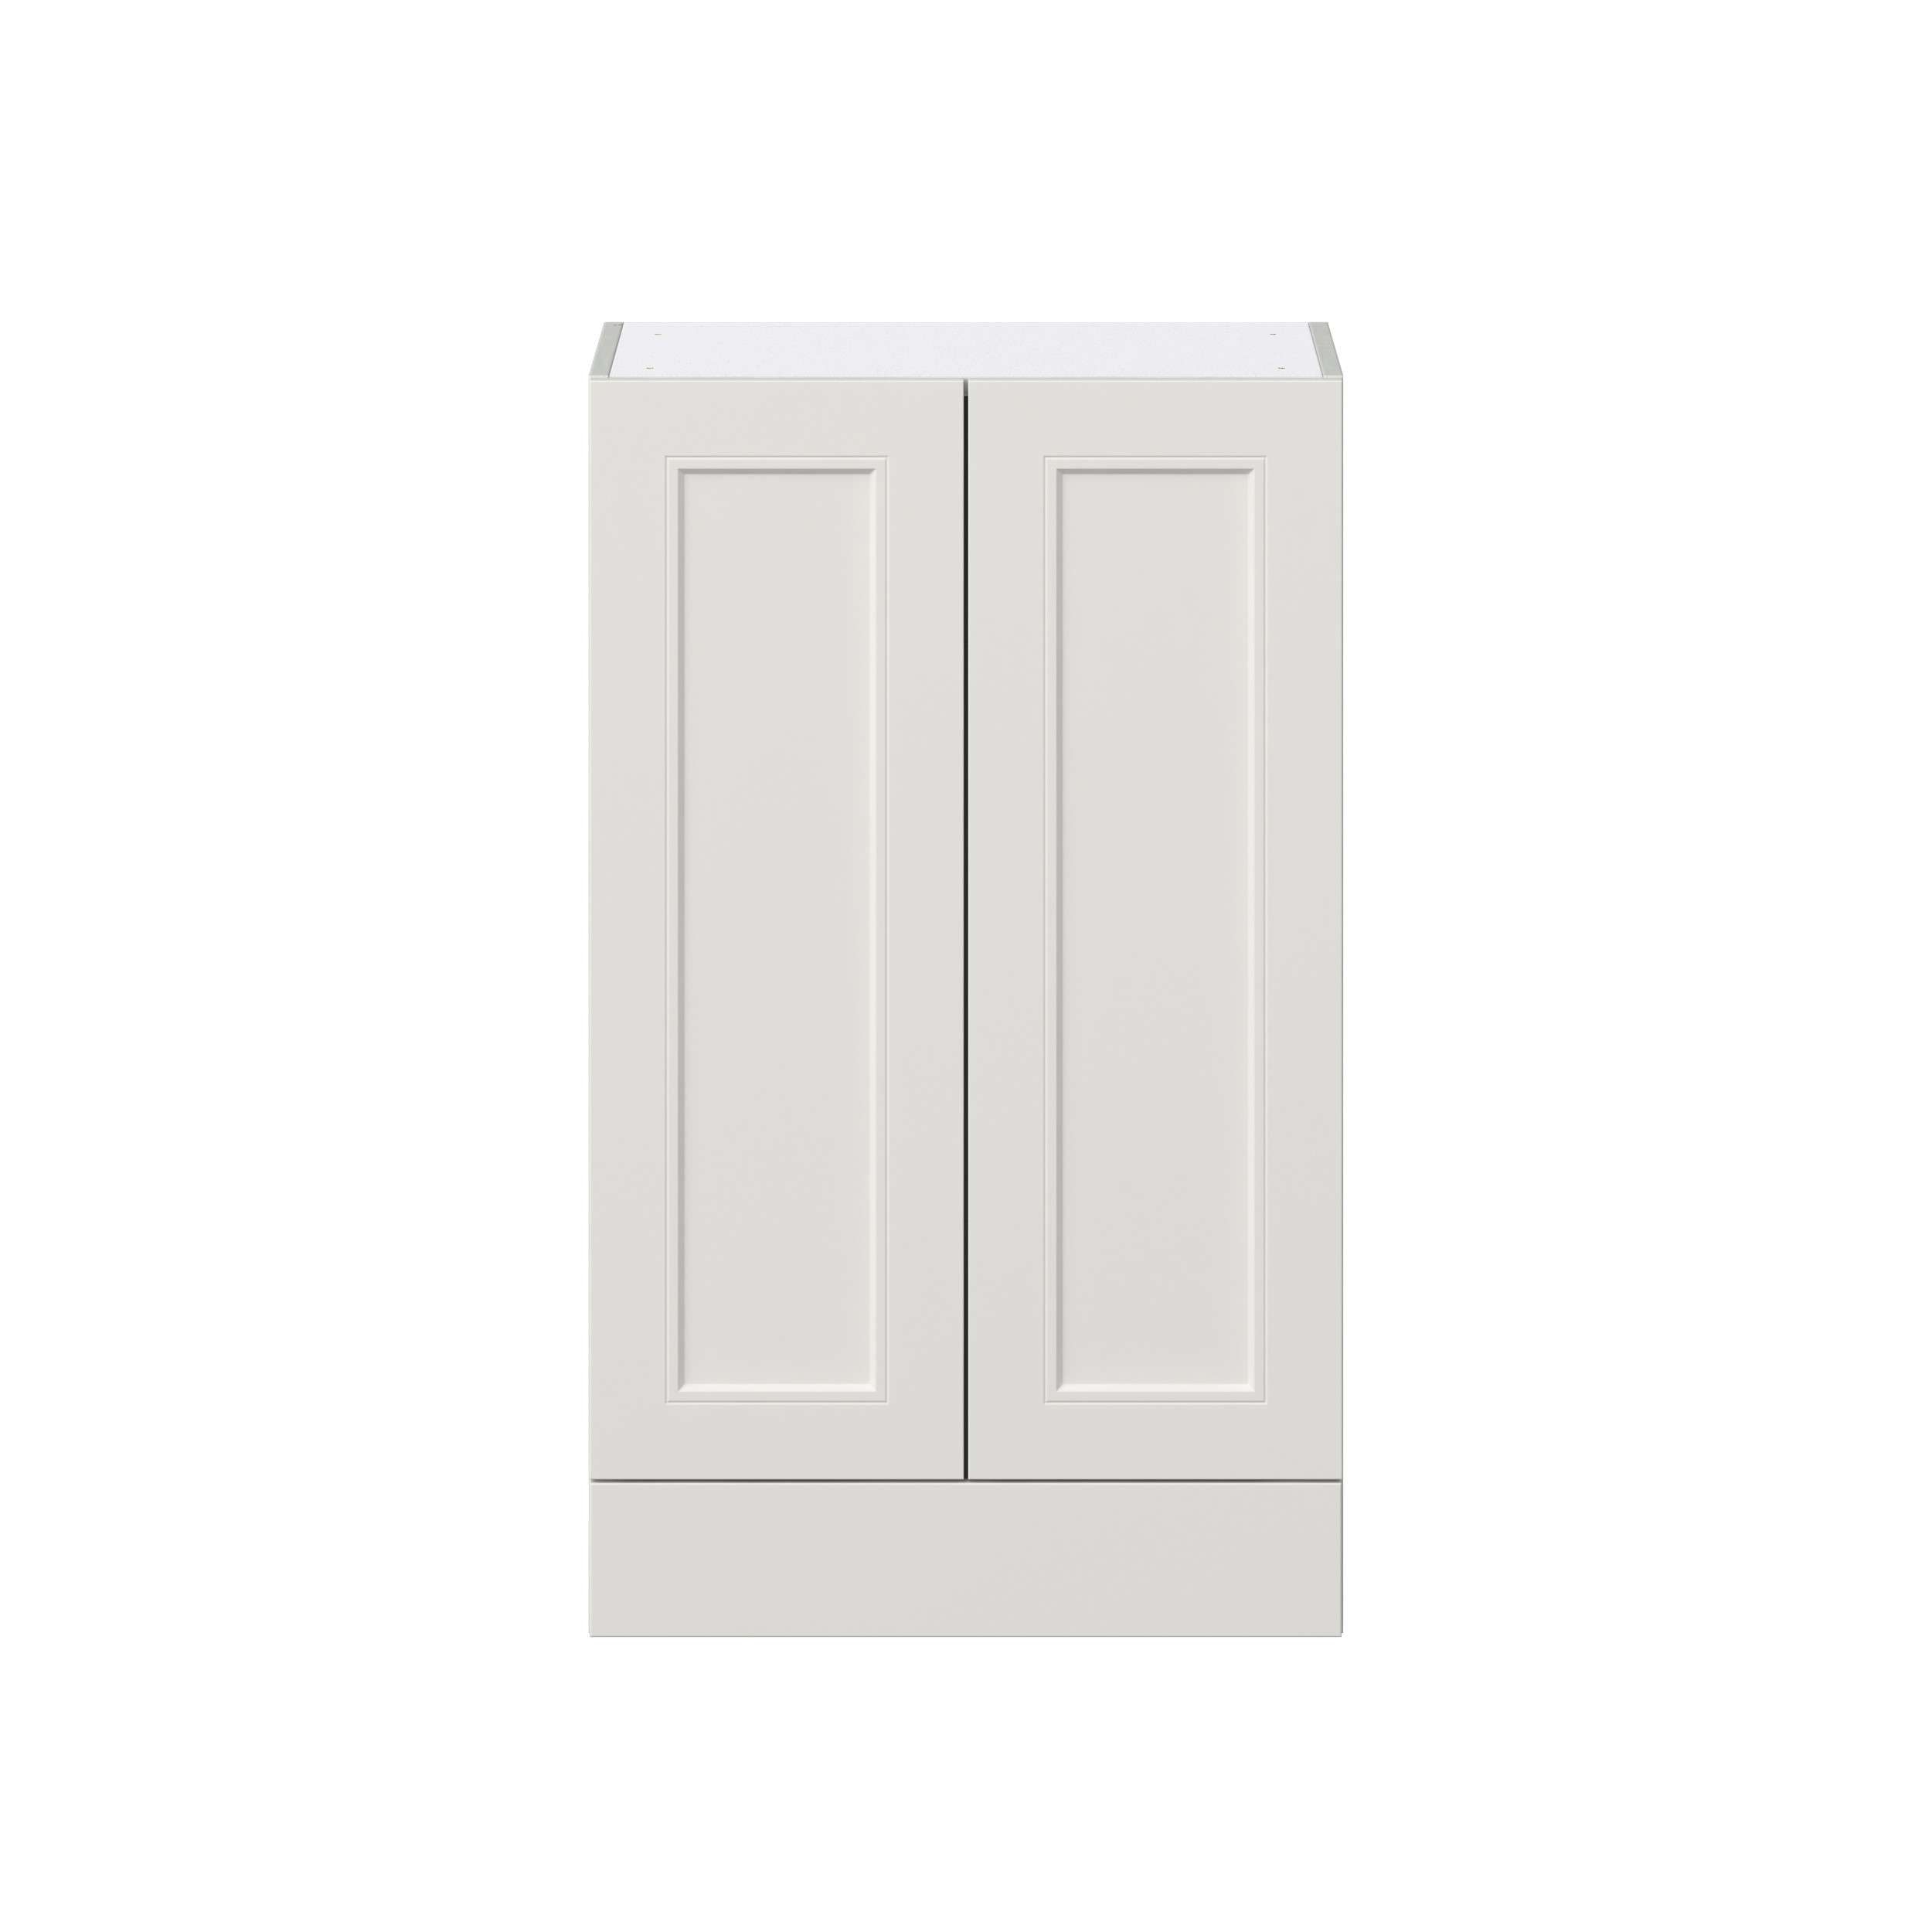 Wisteria Painted Light Gray Recessed Assembled Wall Cabinet with 2 Doors and a 5 in. Drawer (24 in. W x 40 in. H x 14 in. D)